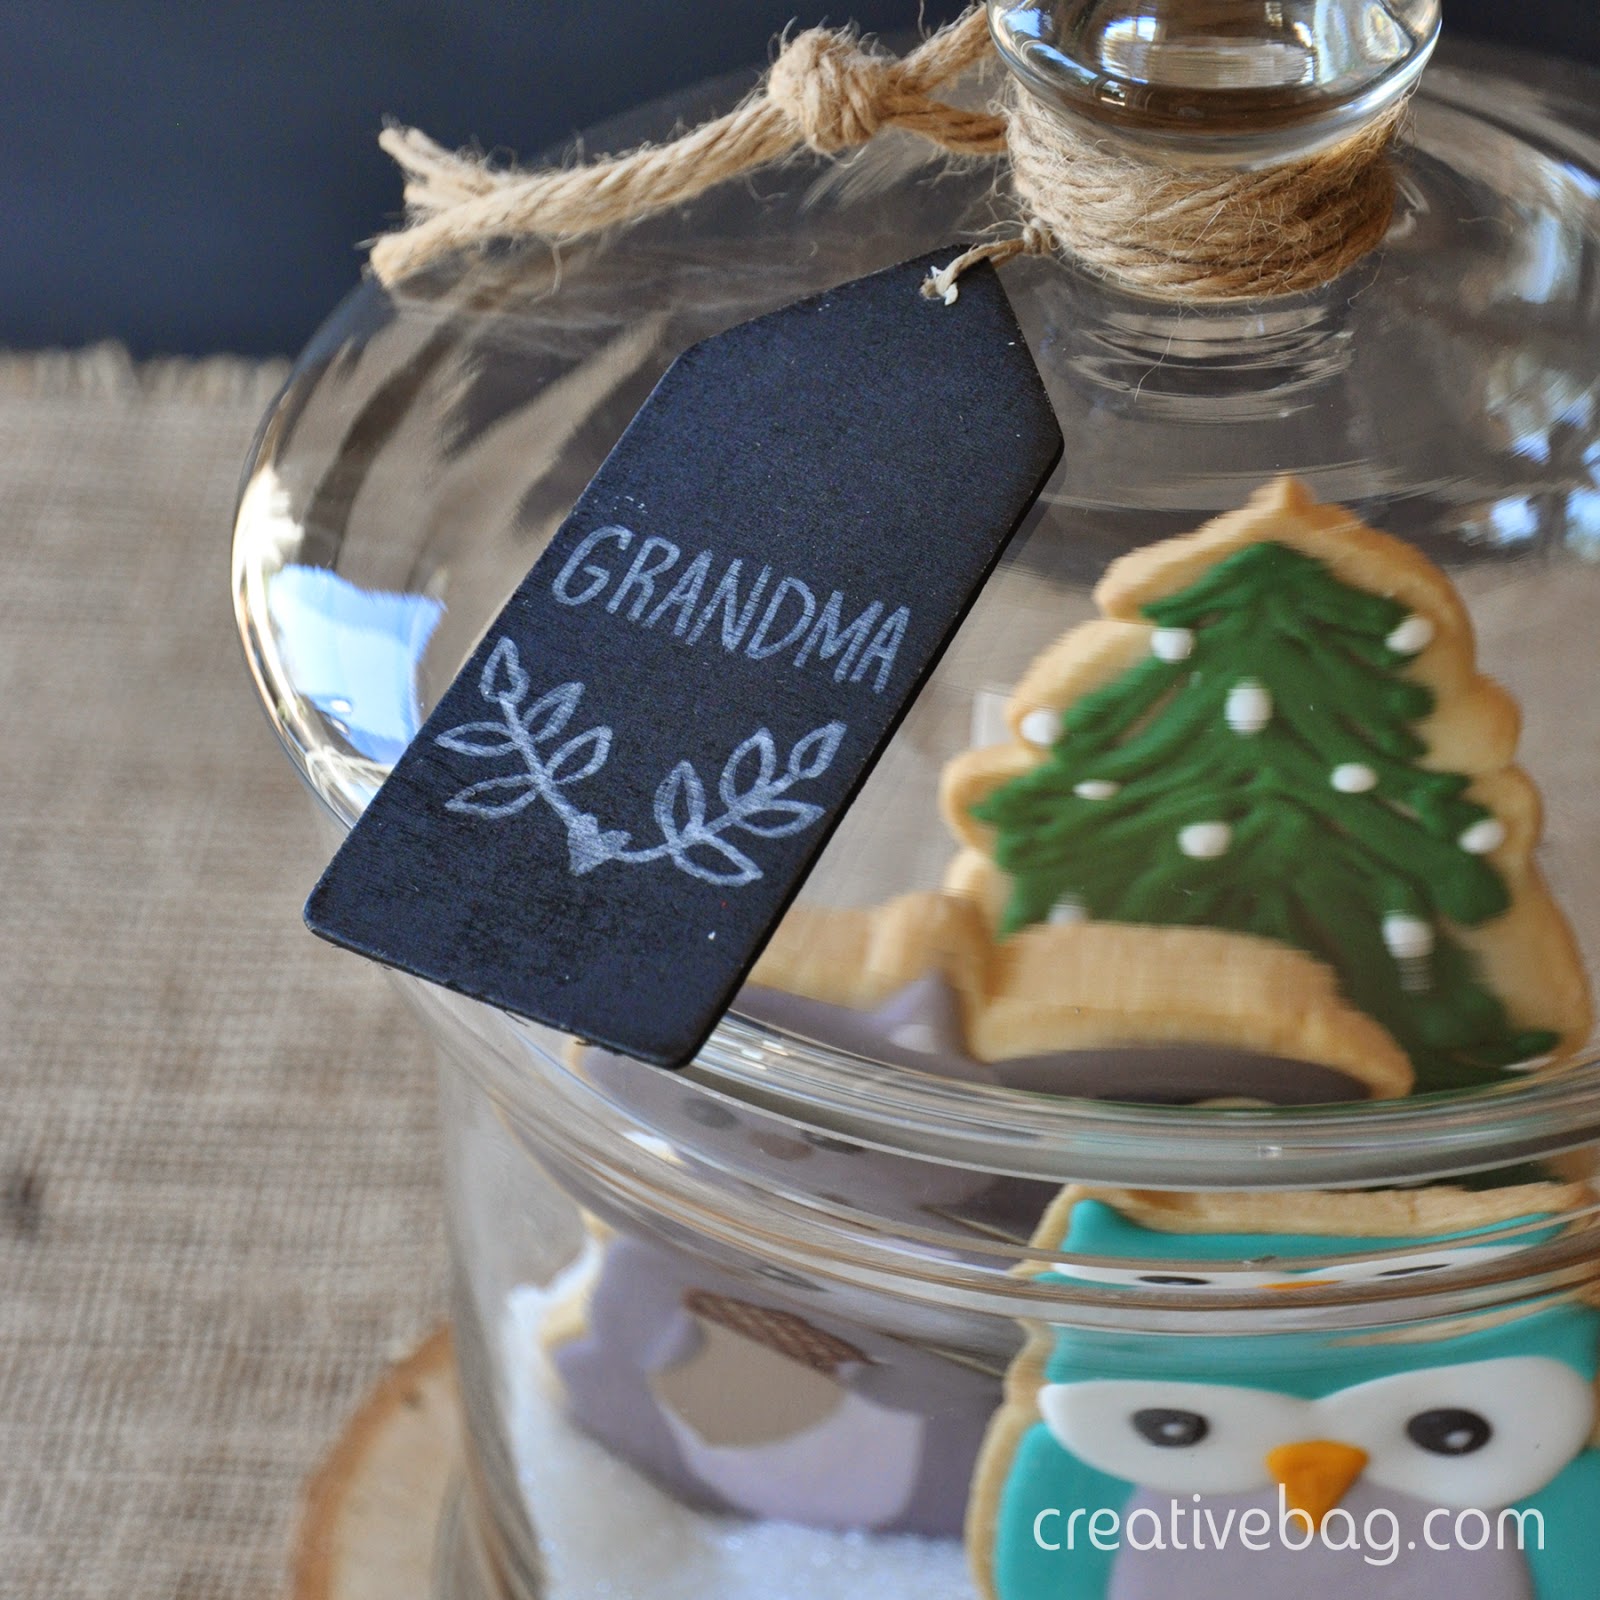 custom made cookies packaged in glass containers for holiday gift giving | creativebag.com